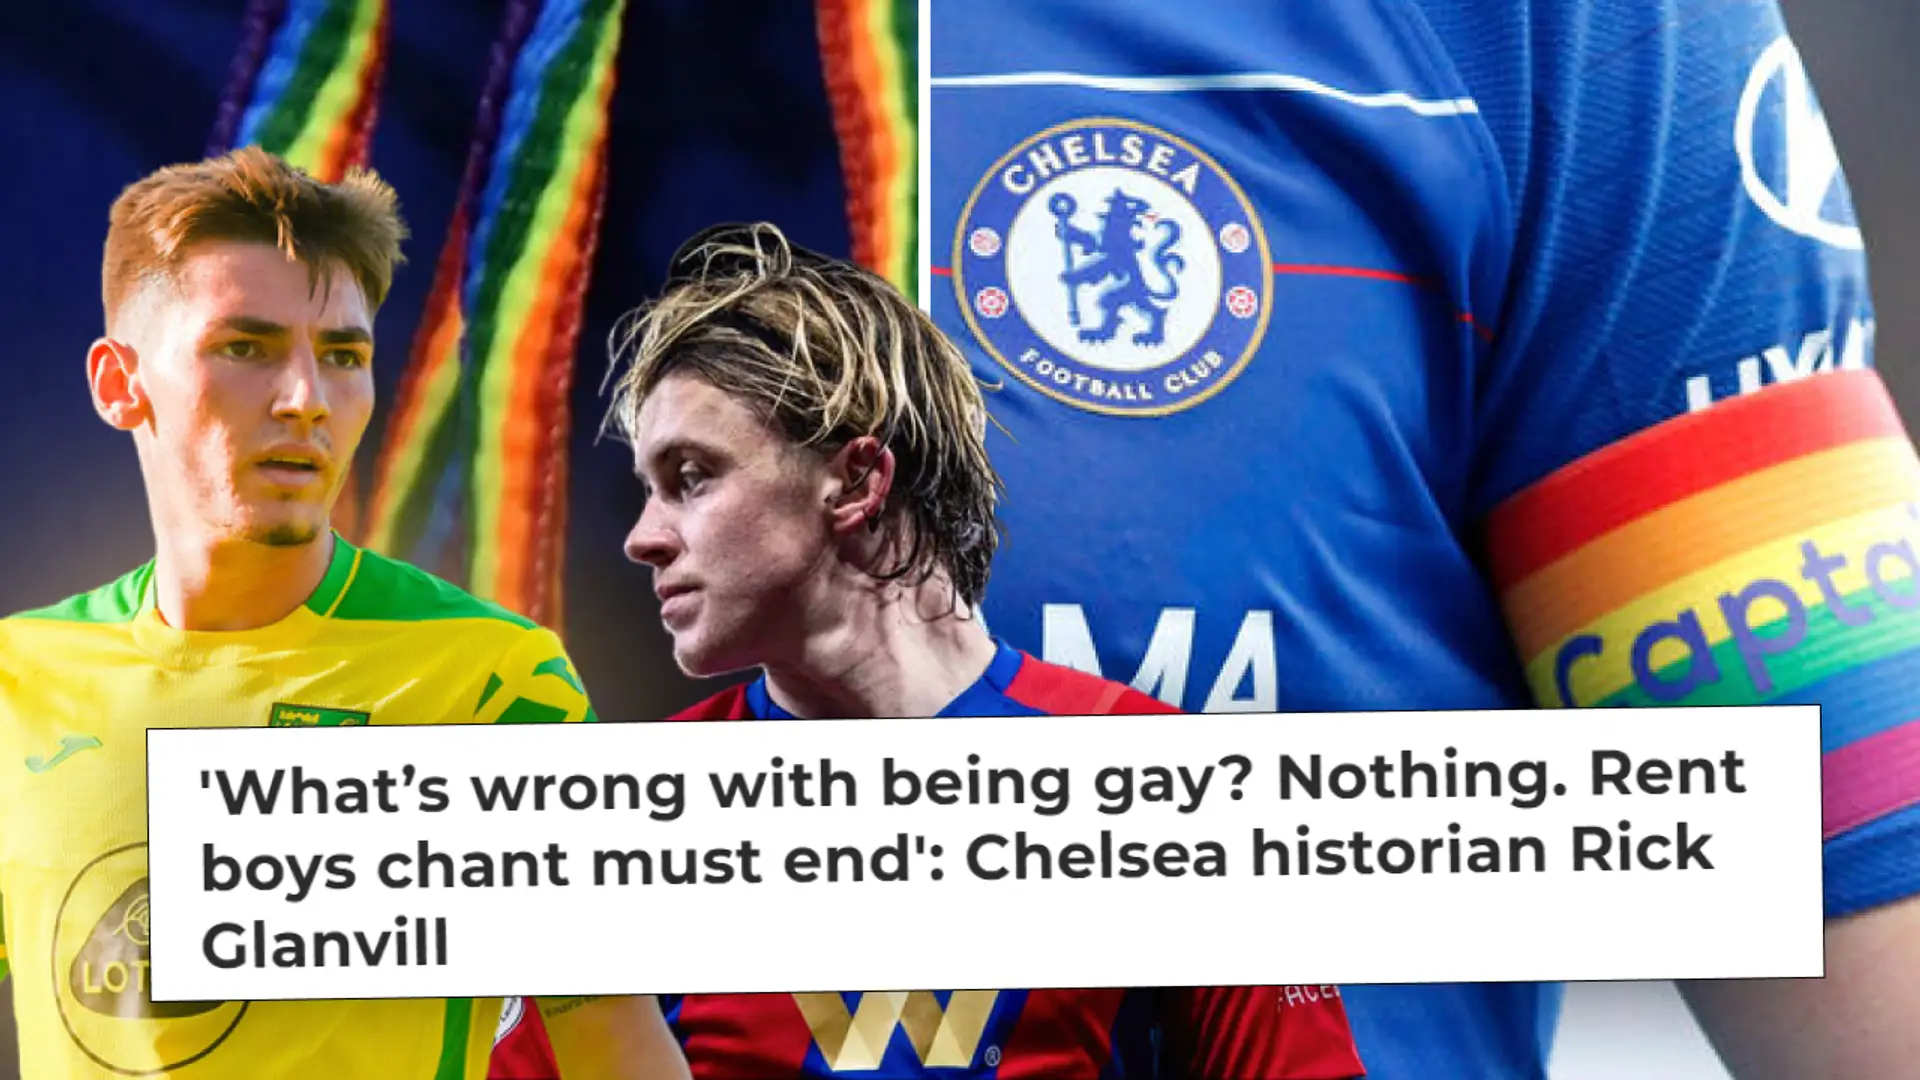 How would you react if Chelsea player came out as gay?